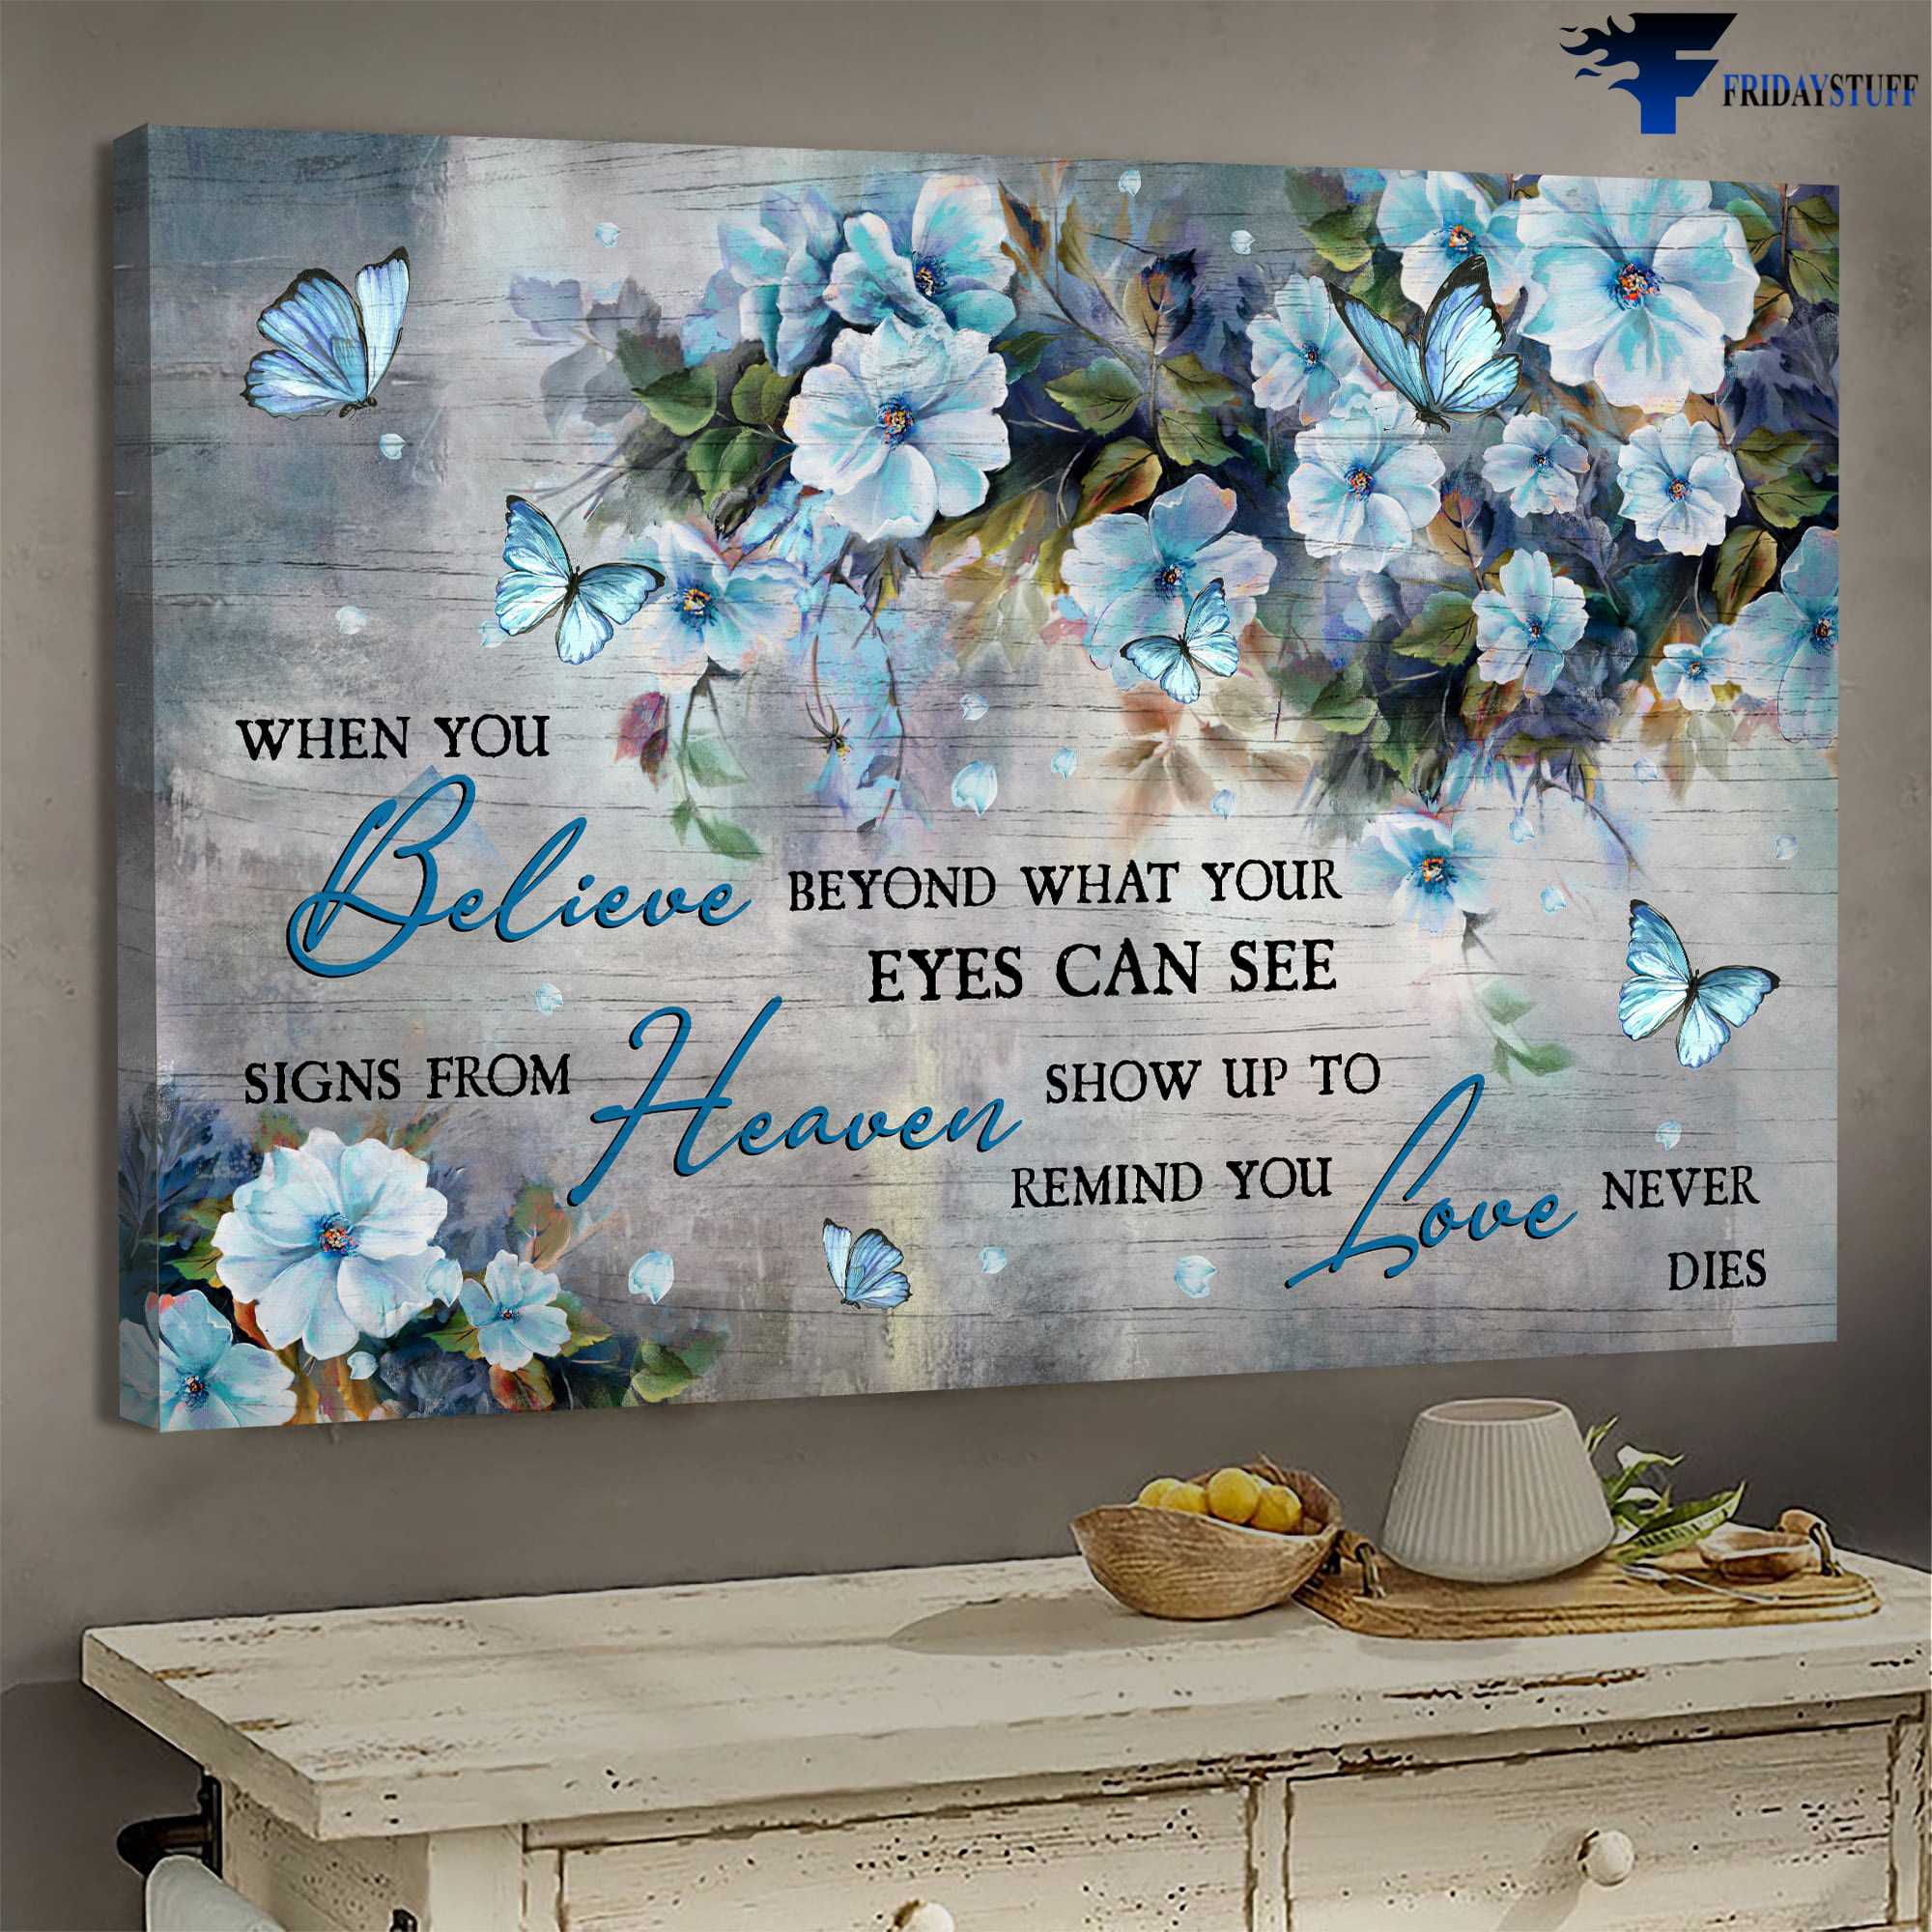 Butterfly Flower - When You Believe Beyond What Your Eyes Can See, Signs From Heaven Show Up To Remind You, Love Never Dies